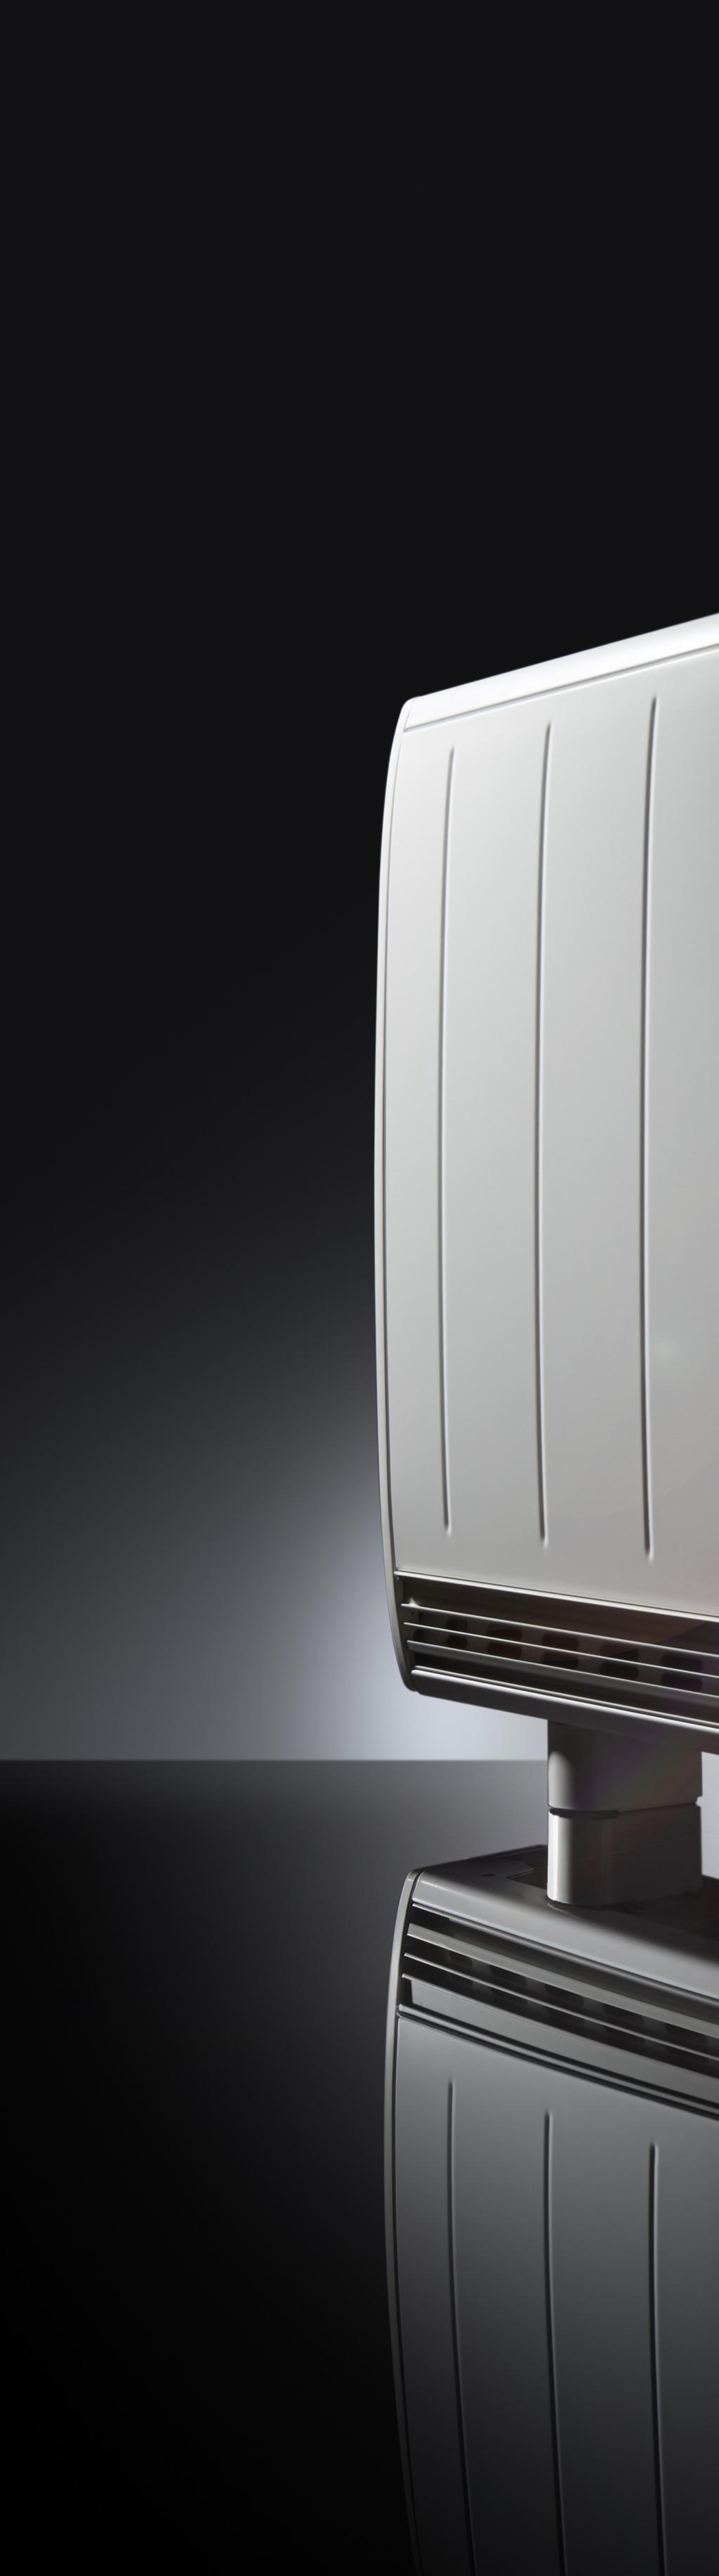 Quantum. Low running costs. Total control. Quantum is the world s most advanced electric space heater.